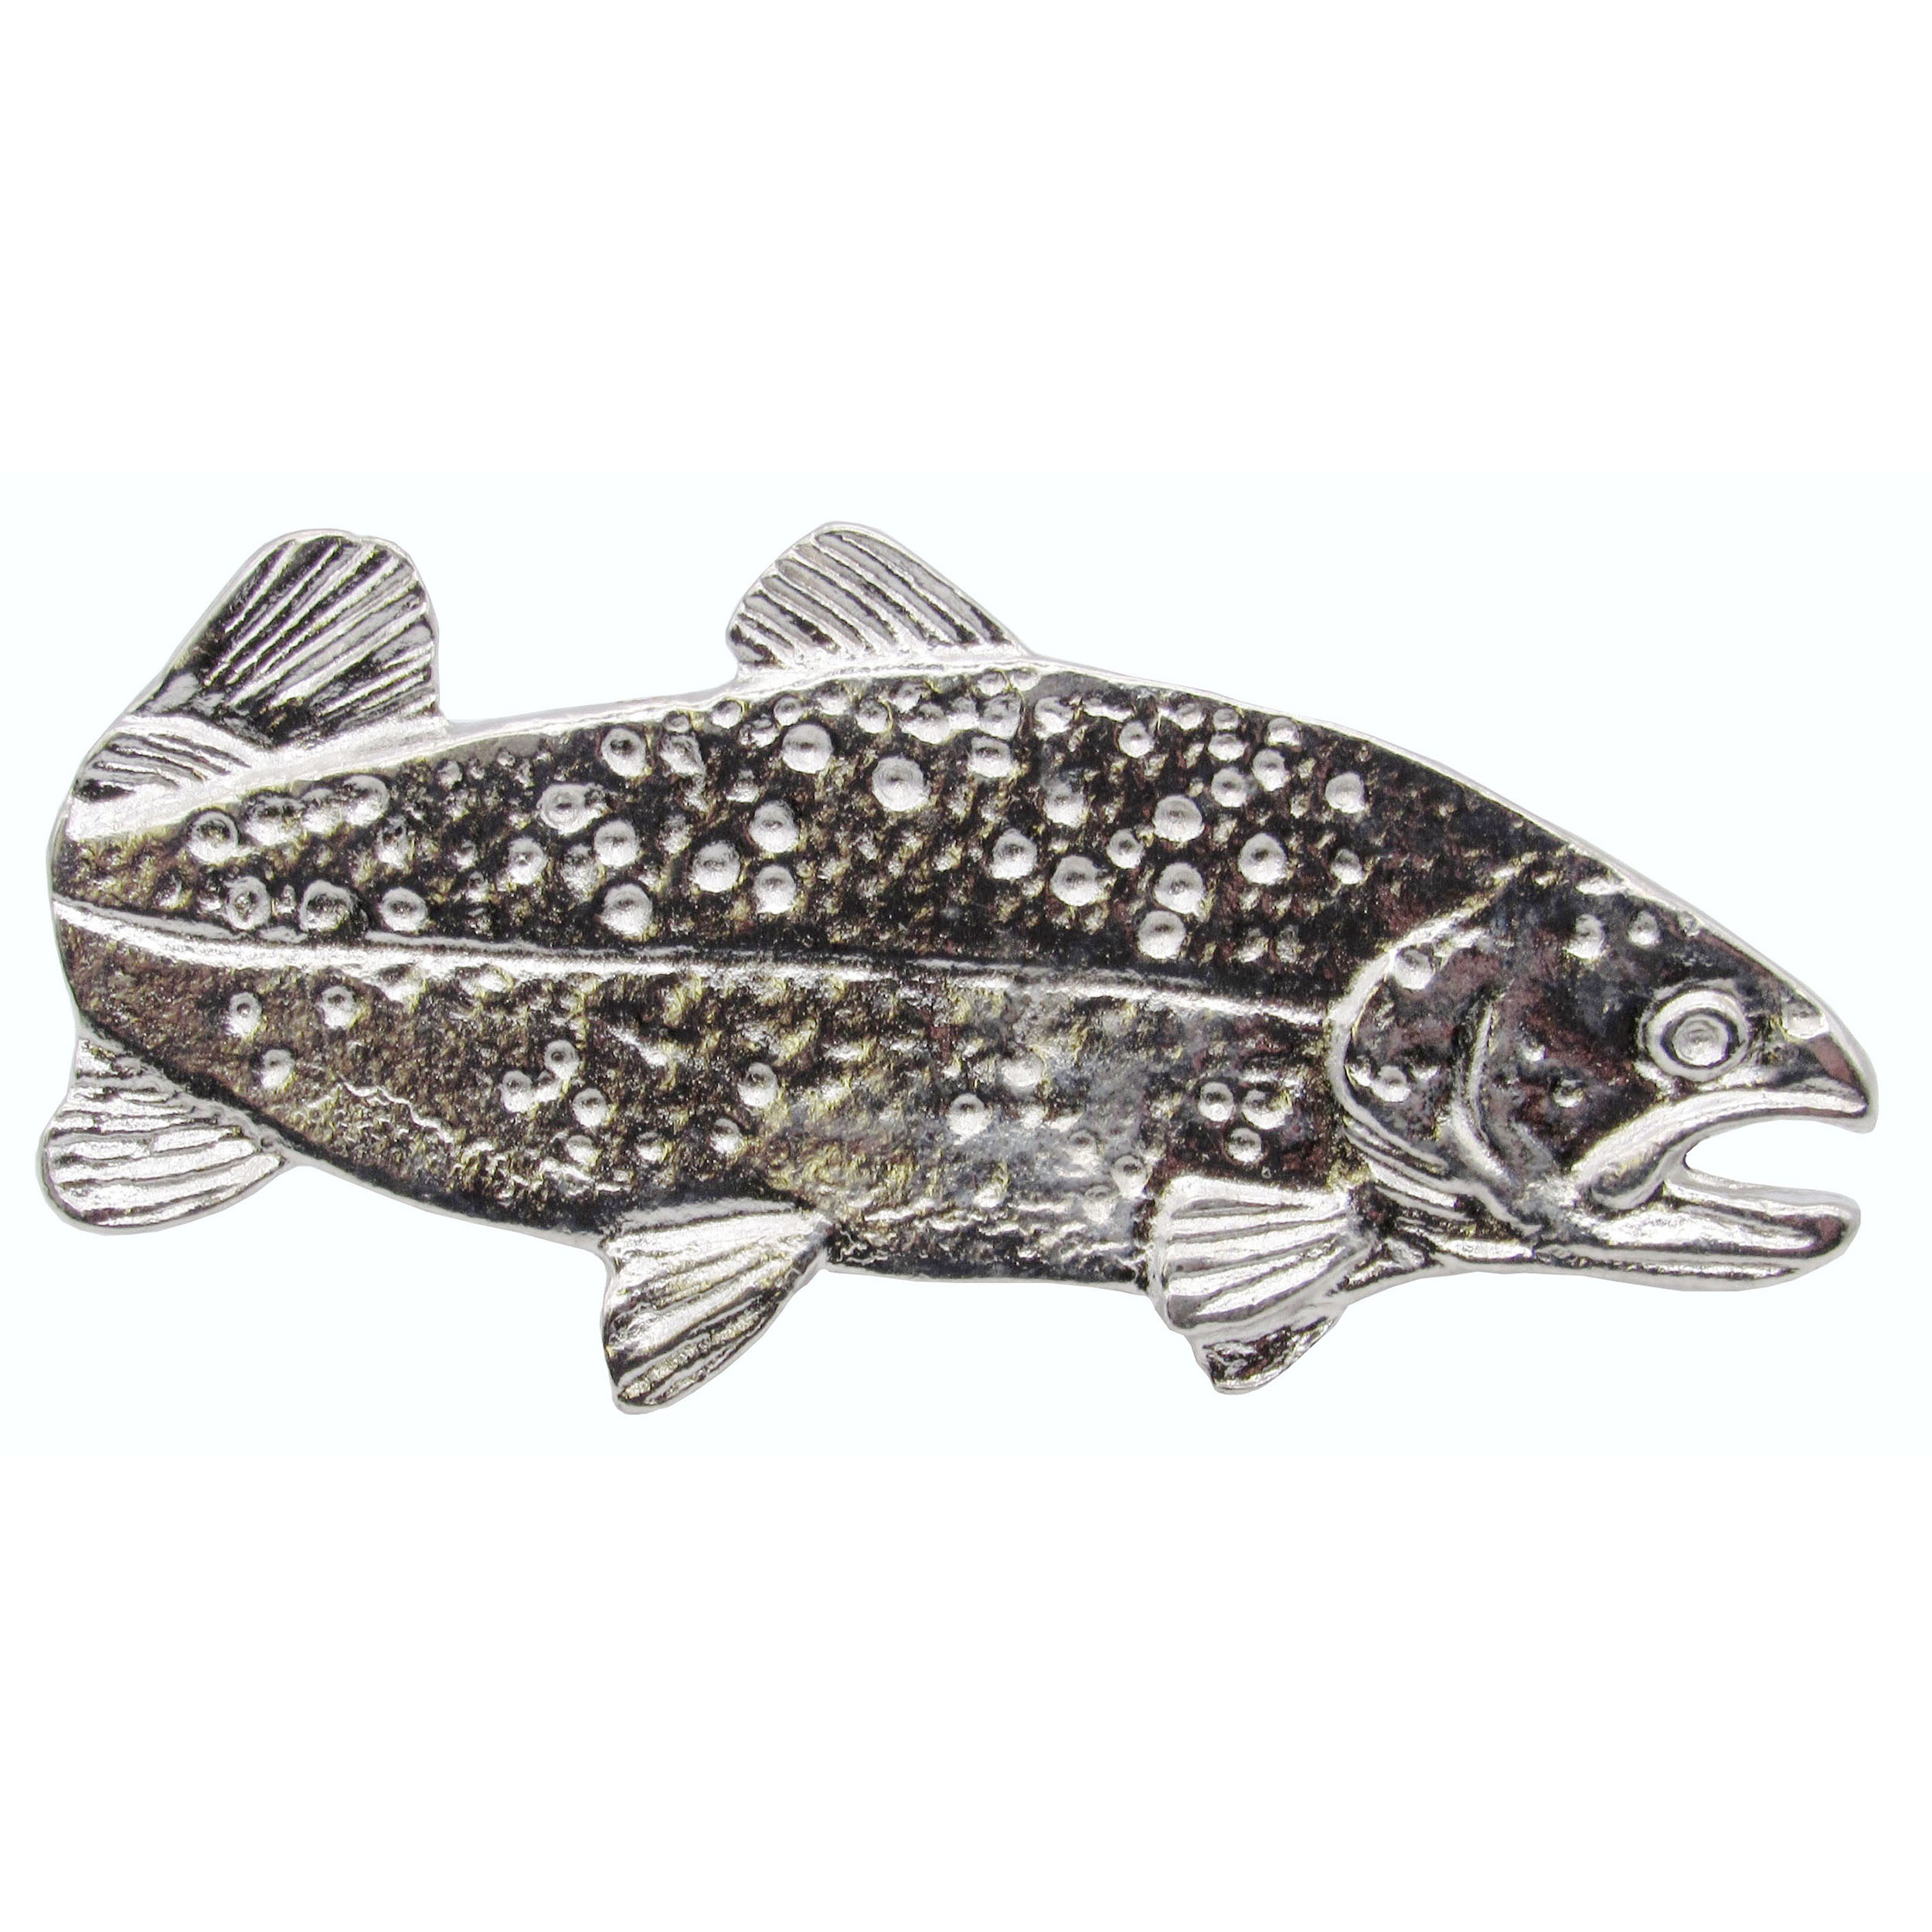 2" Long Trout Pull Right Facing, Nickel, Model 095n